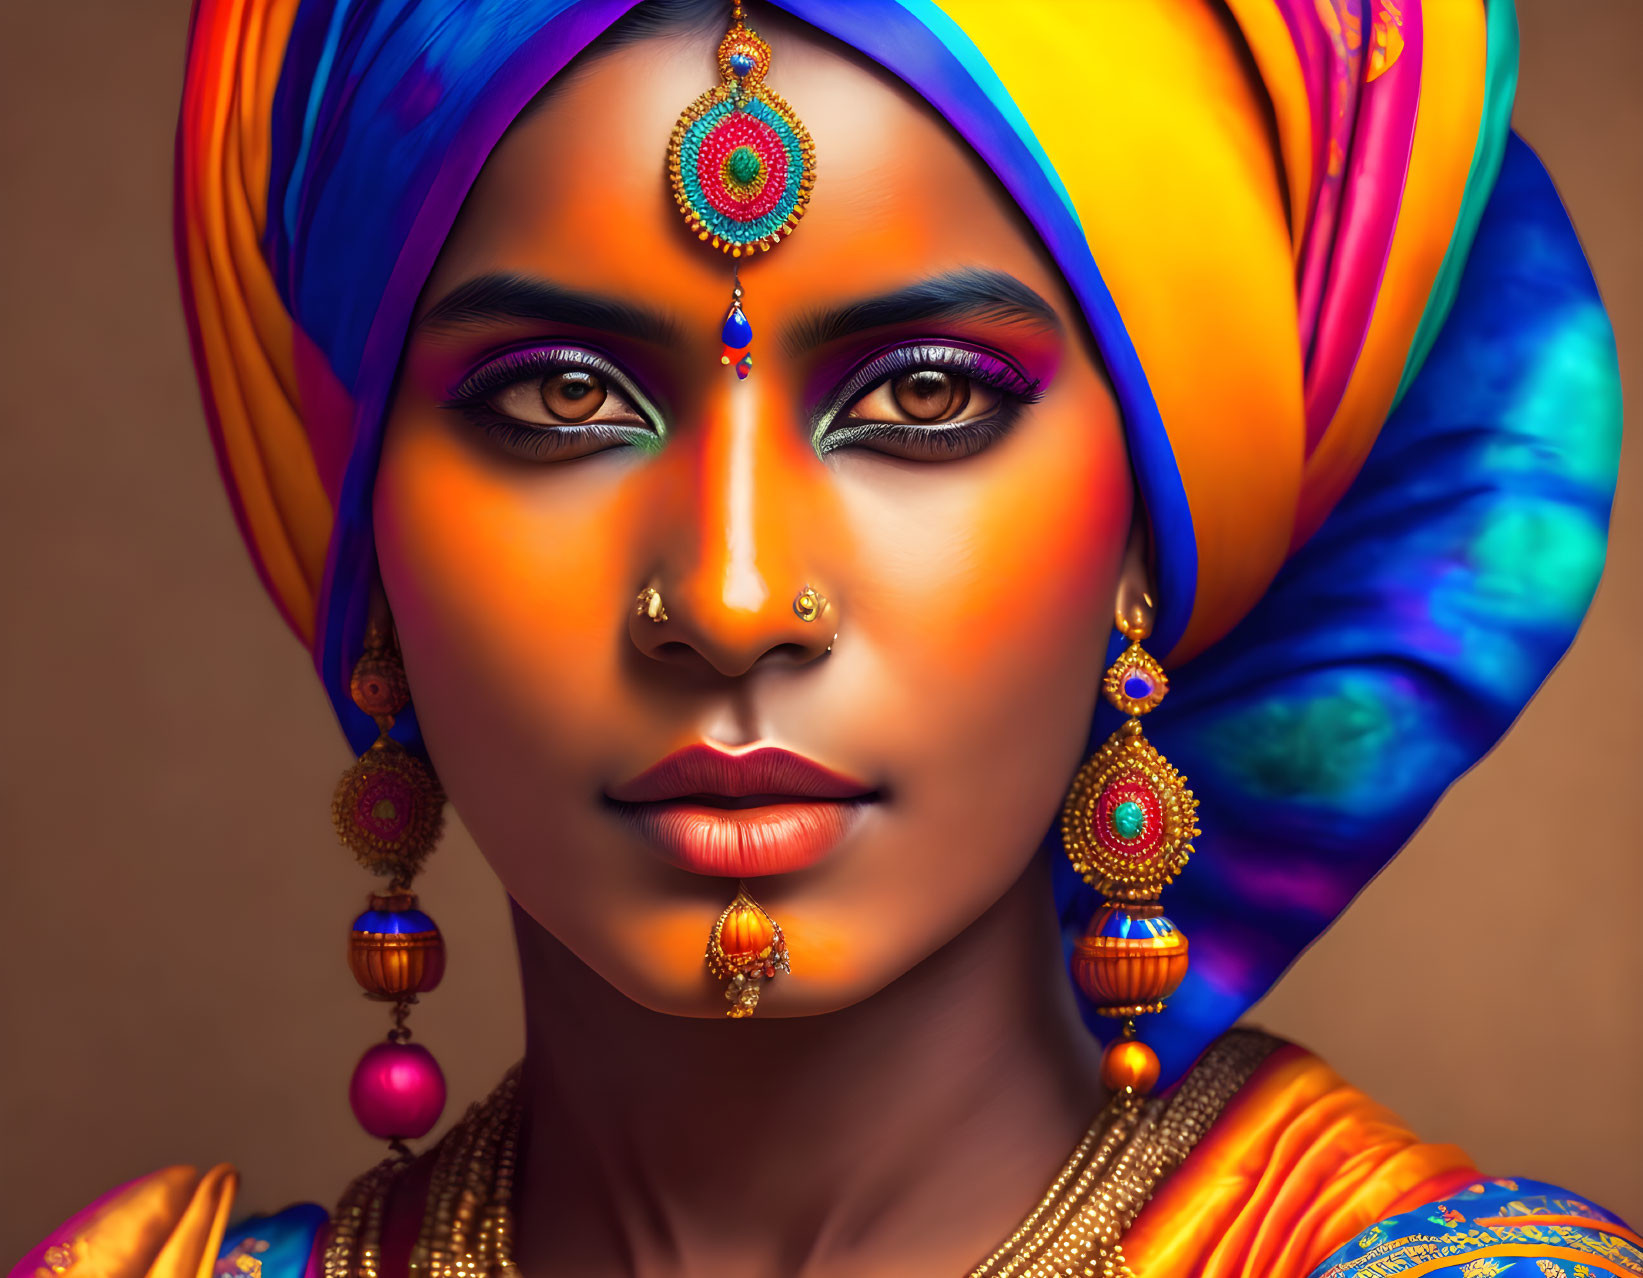 Vibrant multicolored turban on woman with striking makeup